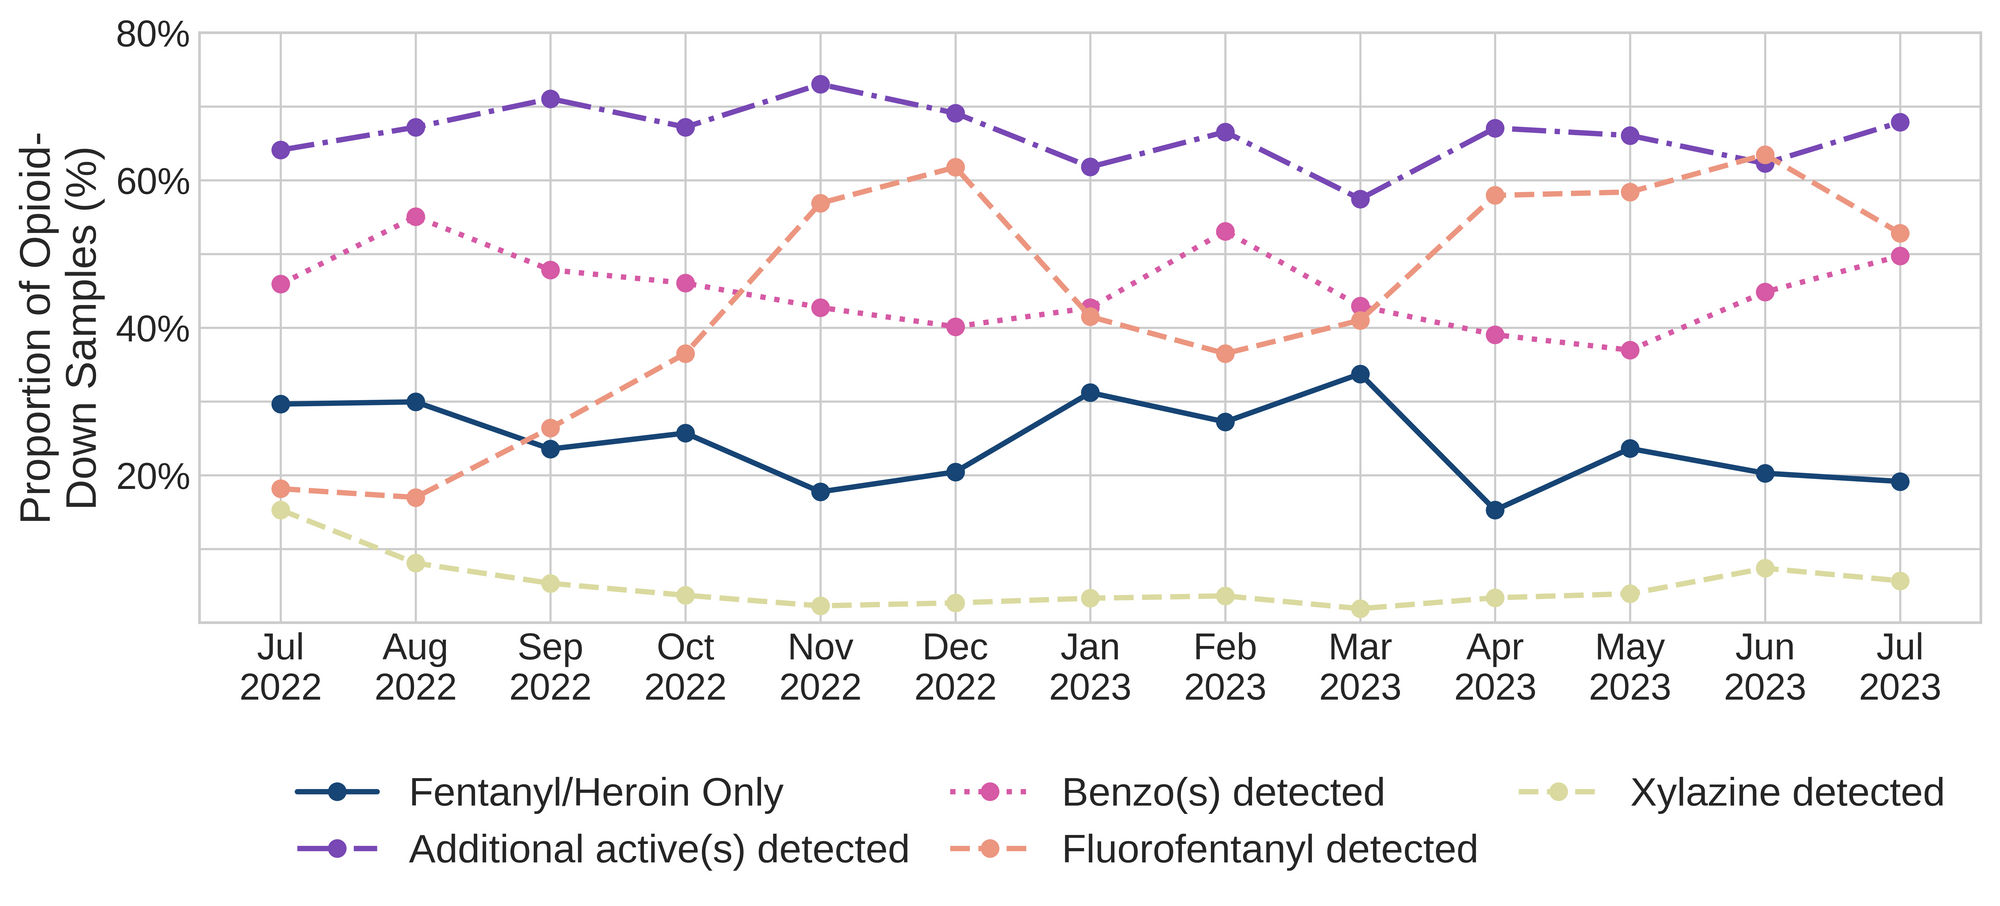 Figure 3. The percentage of expected opioid-down samples checked between July 2022 and July 2023 that only contained fentanyl/heroin actives (solid dark blue), opioid-down samples with an additional active detected (dot-dashed purple), opioid-down samples that contained a benzodiazepine-related drug (dotted magenta), opioid-down samples that contained fluorofentanyl (dashed salmon), and opioid-down samples that contained xylazine (dashed yellow).